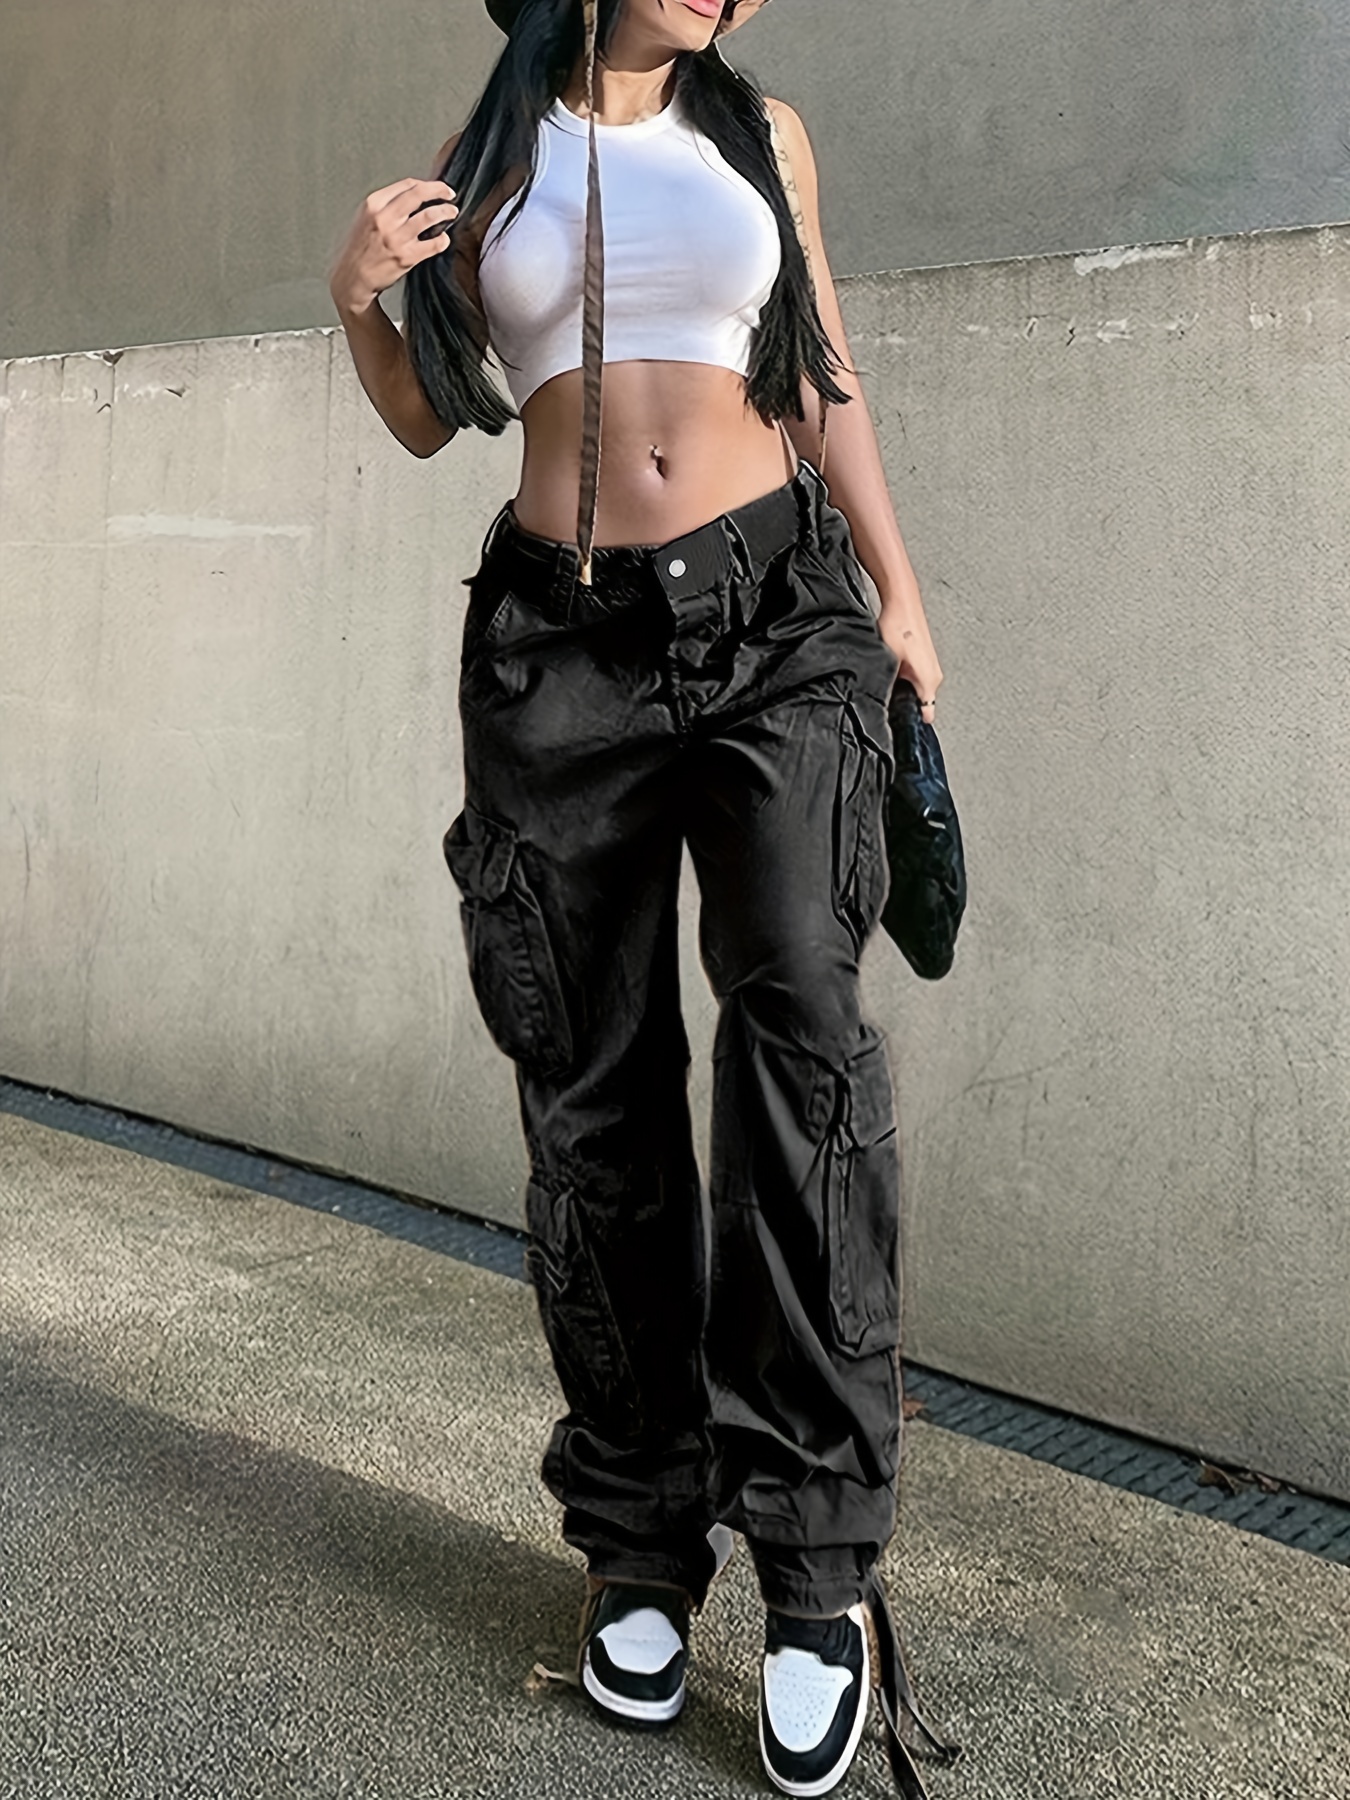  Girls Kids Baggy Cargo Pants Y2K High Waist Casual Wide Leg Cargo  Trousers with Multi Pockets (Black, 6-7): Clothing, Shoes & Jewelry